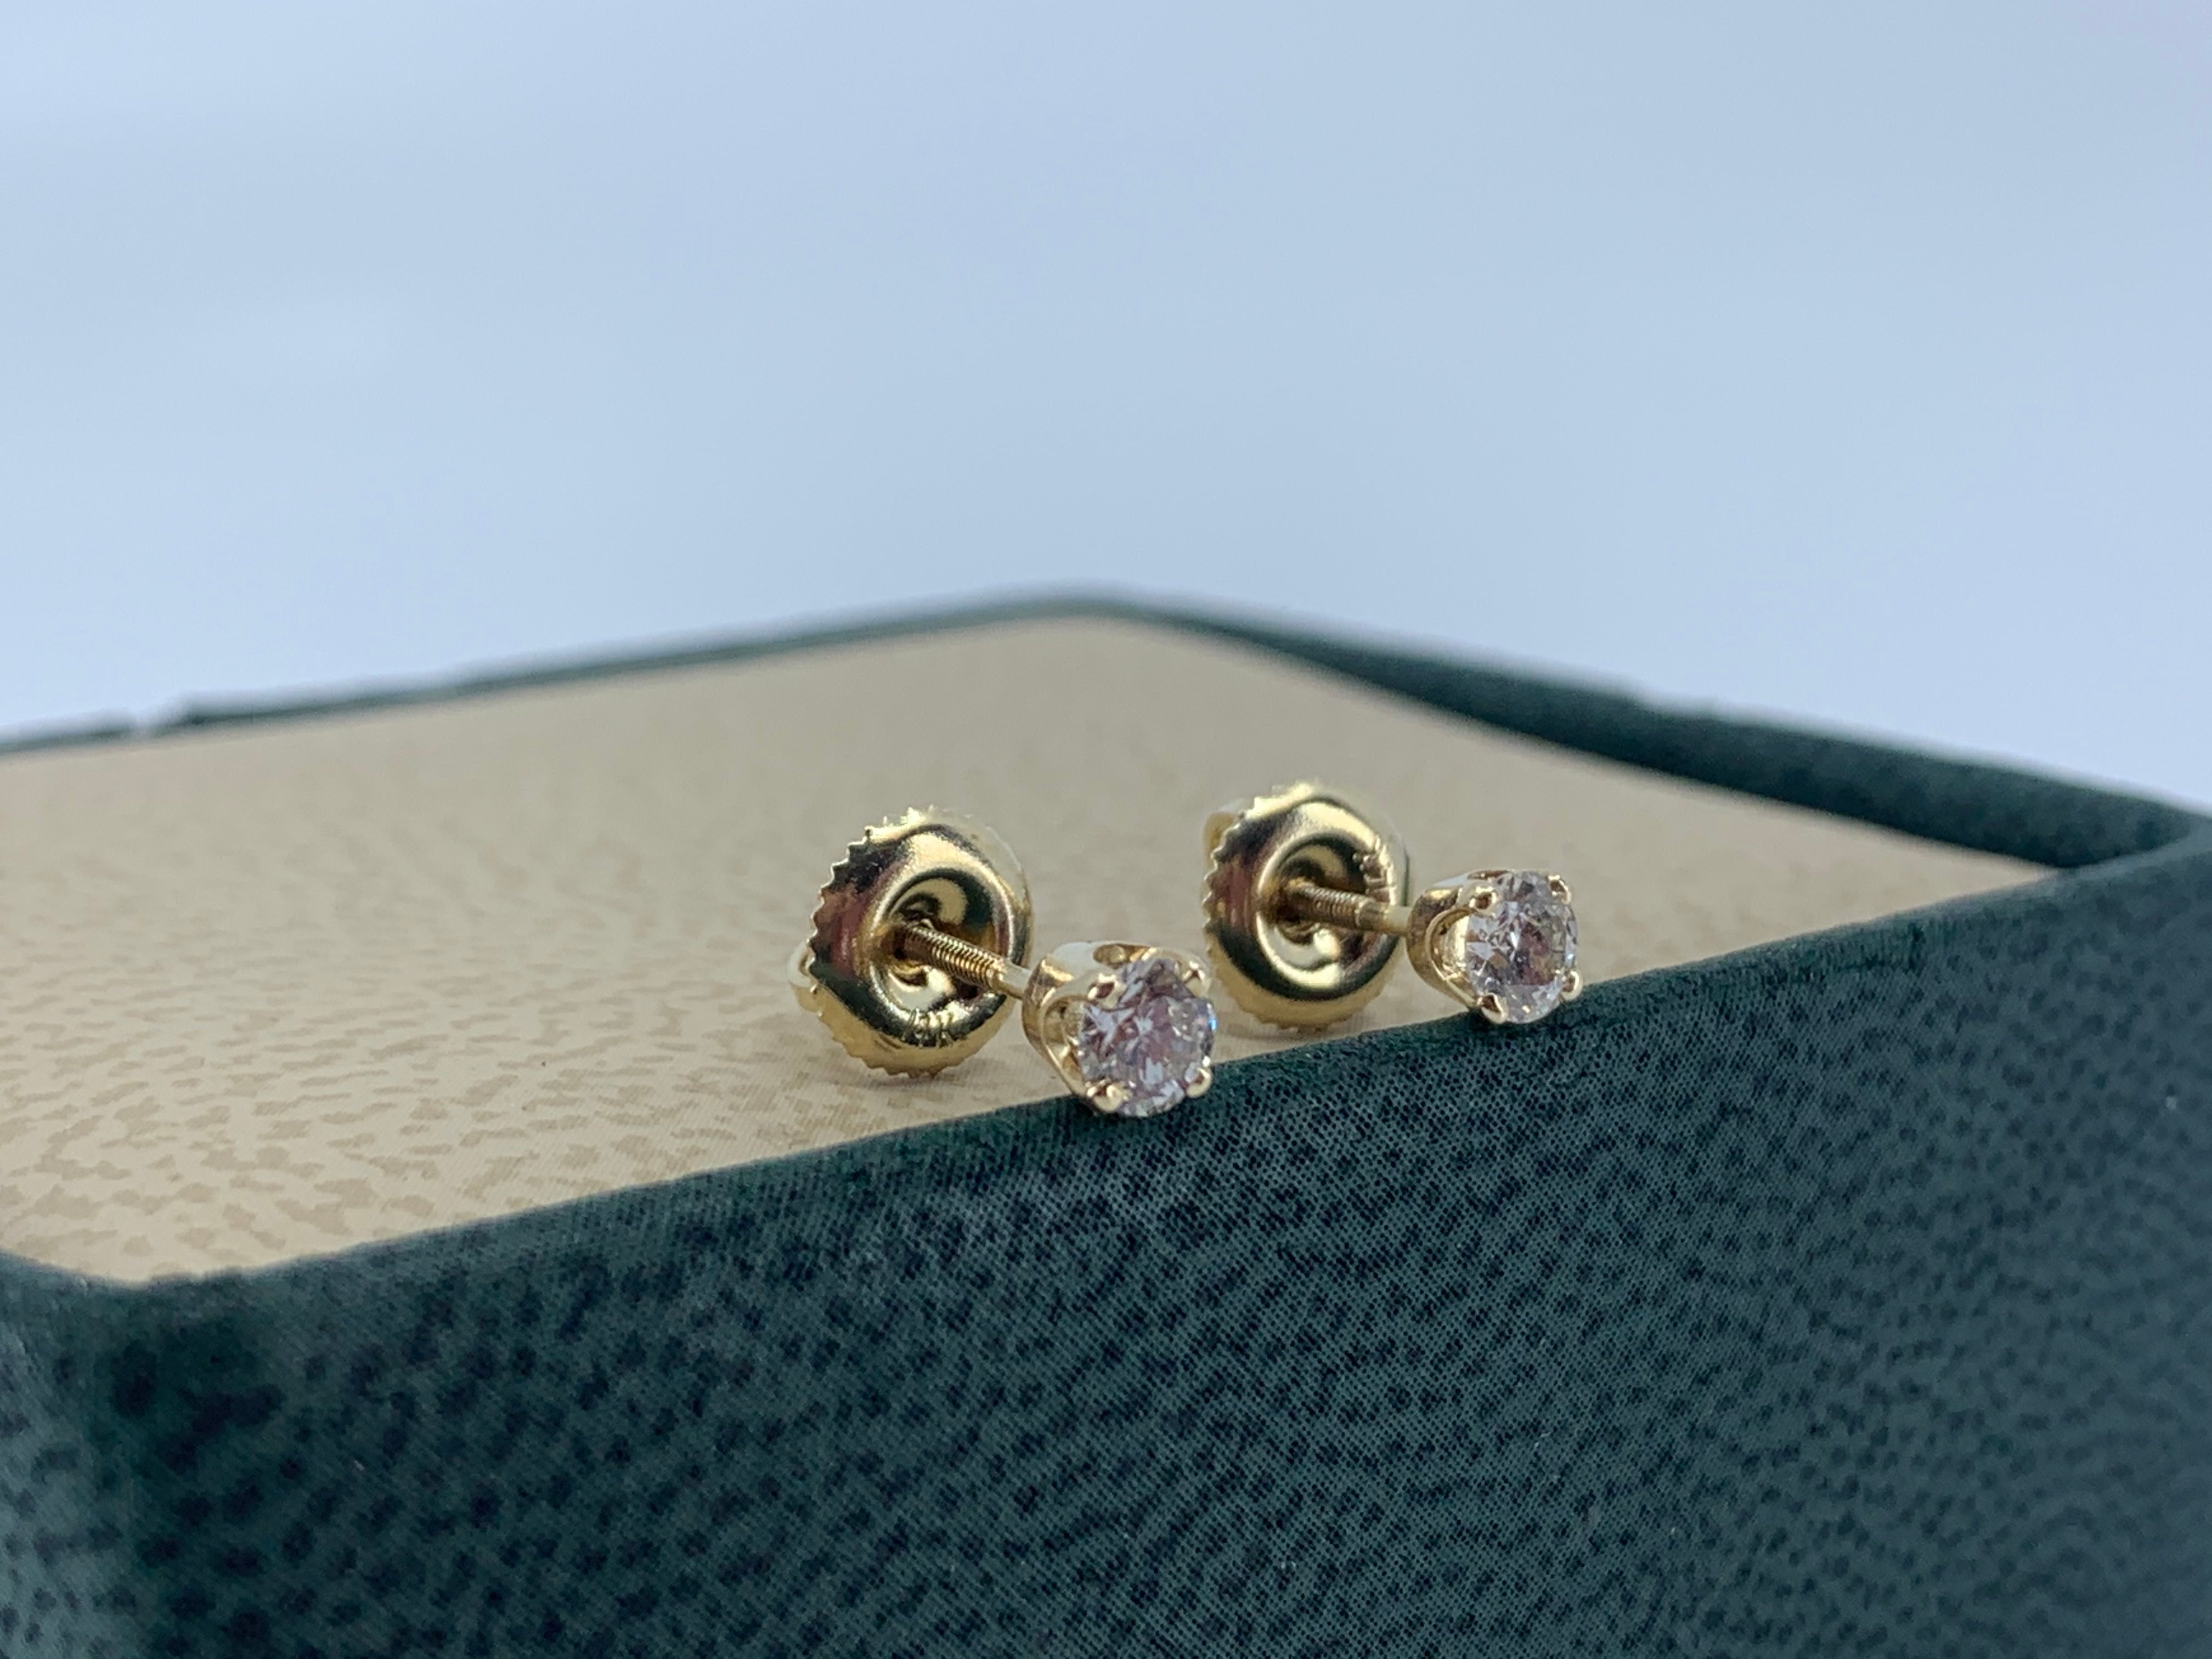 14K Yellow Gold Diamond Studs .32 Carat Total Weight with Screw Back Post